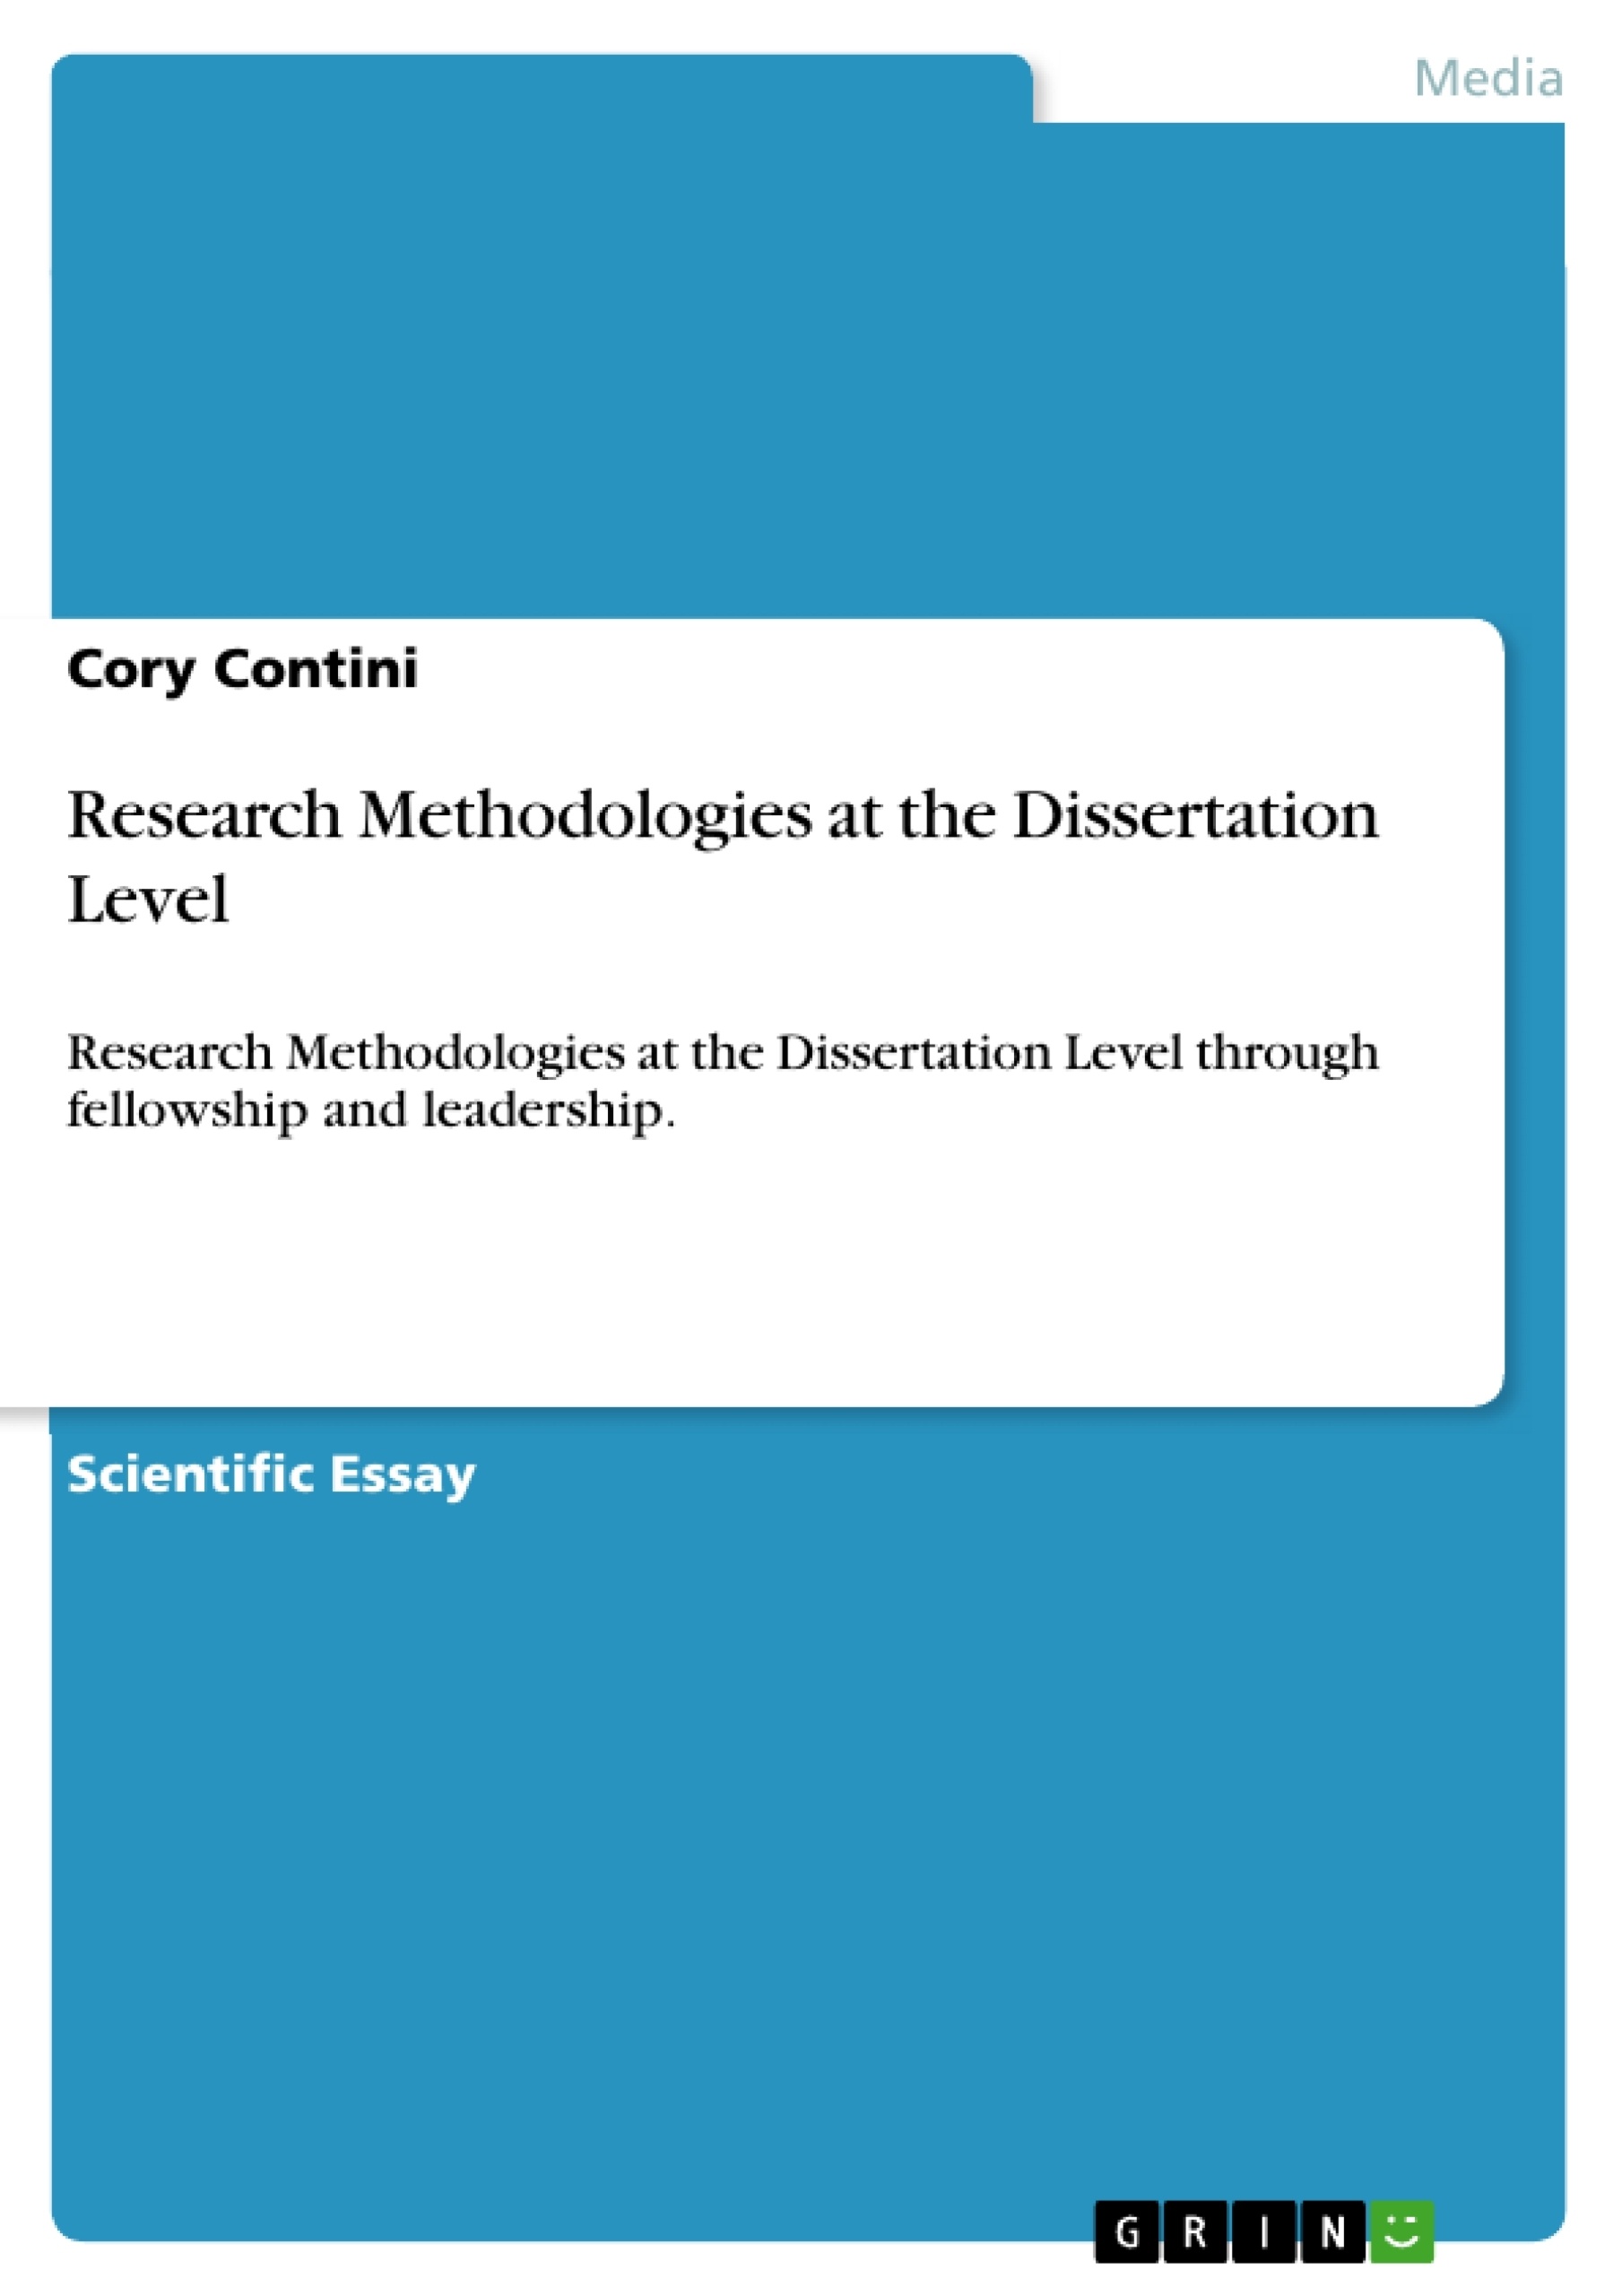 Título: Research Methodologies at the Dissertation Level